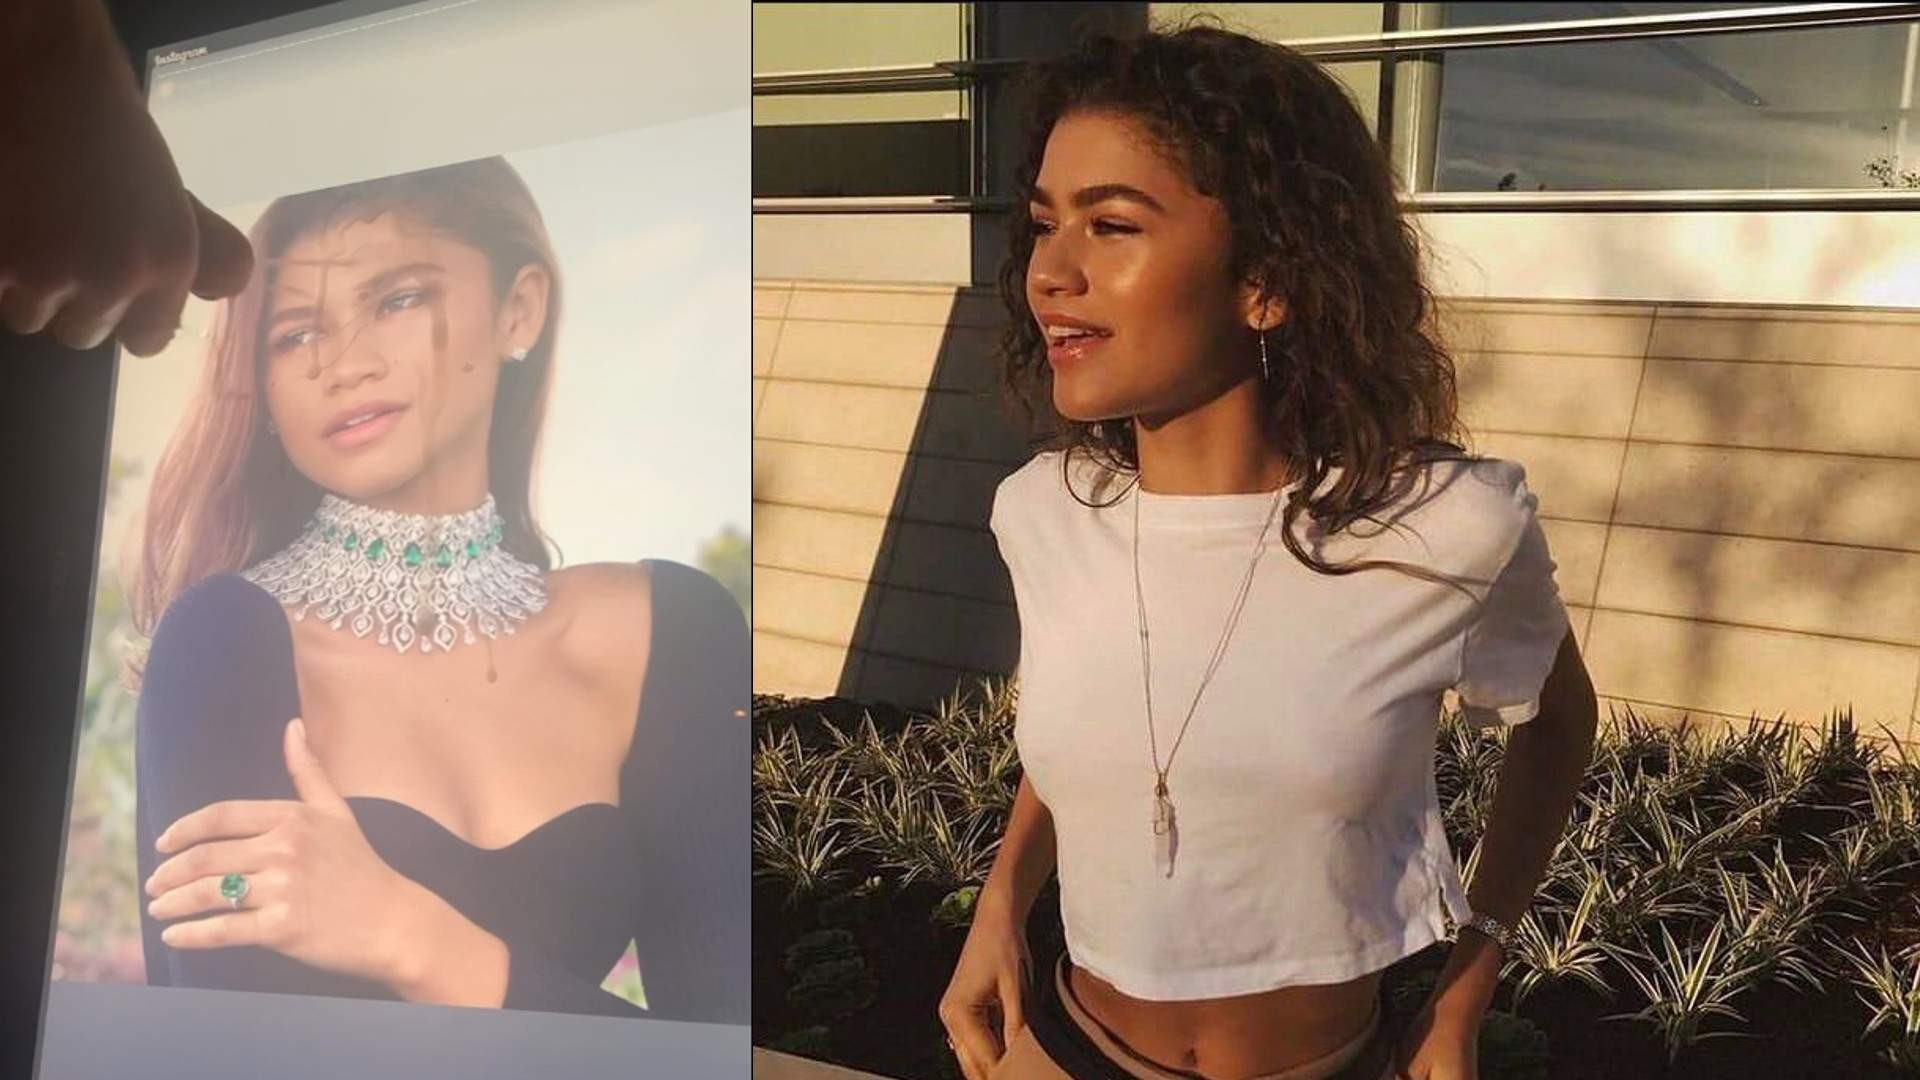 Zendaya Cum Tributes Naked Pictures And Porn Videos